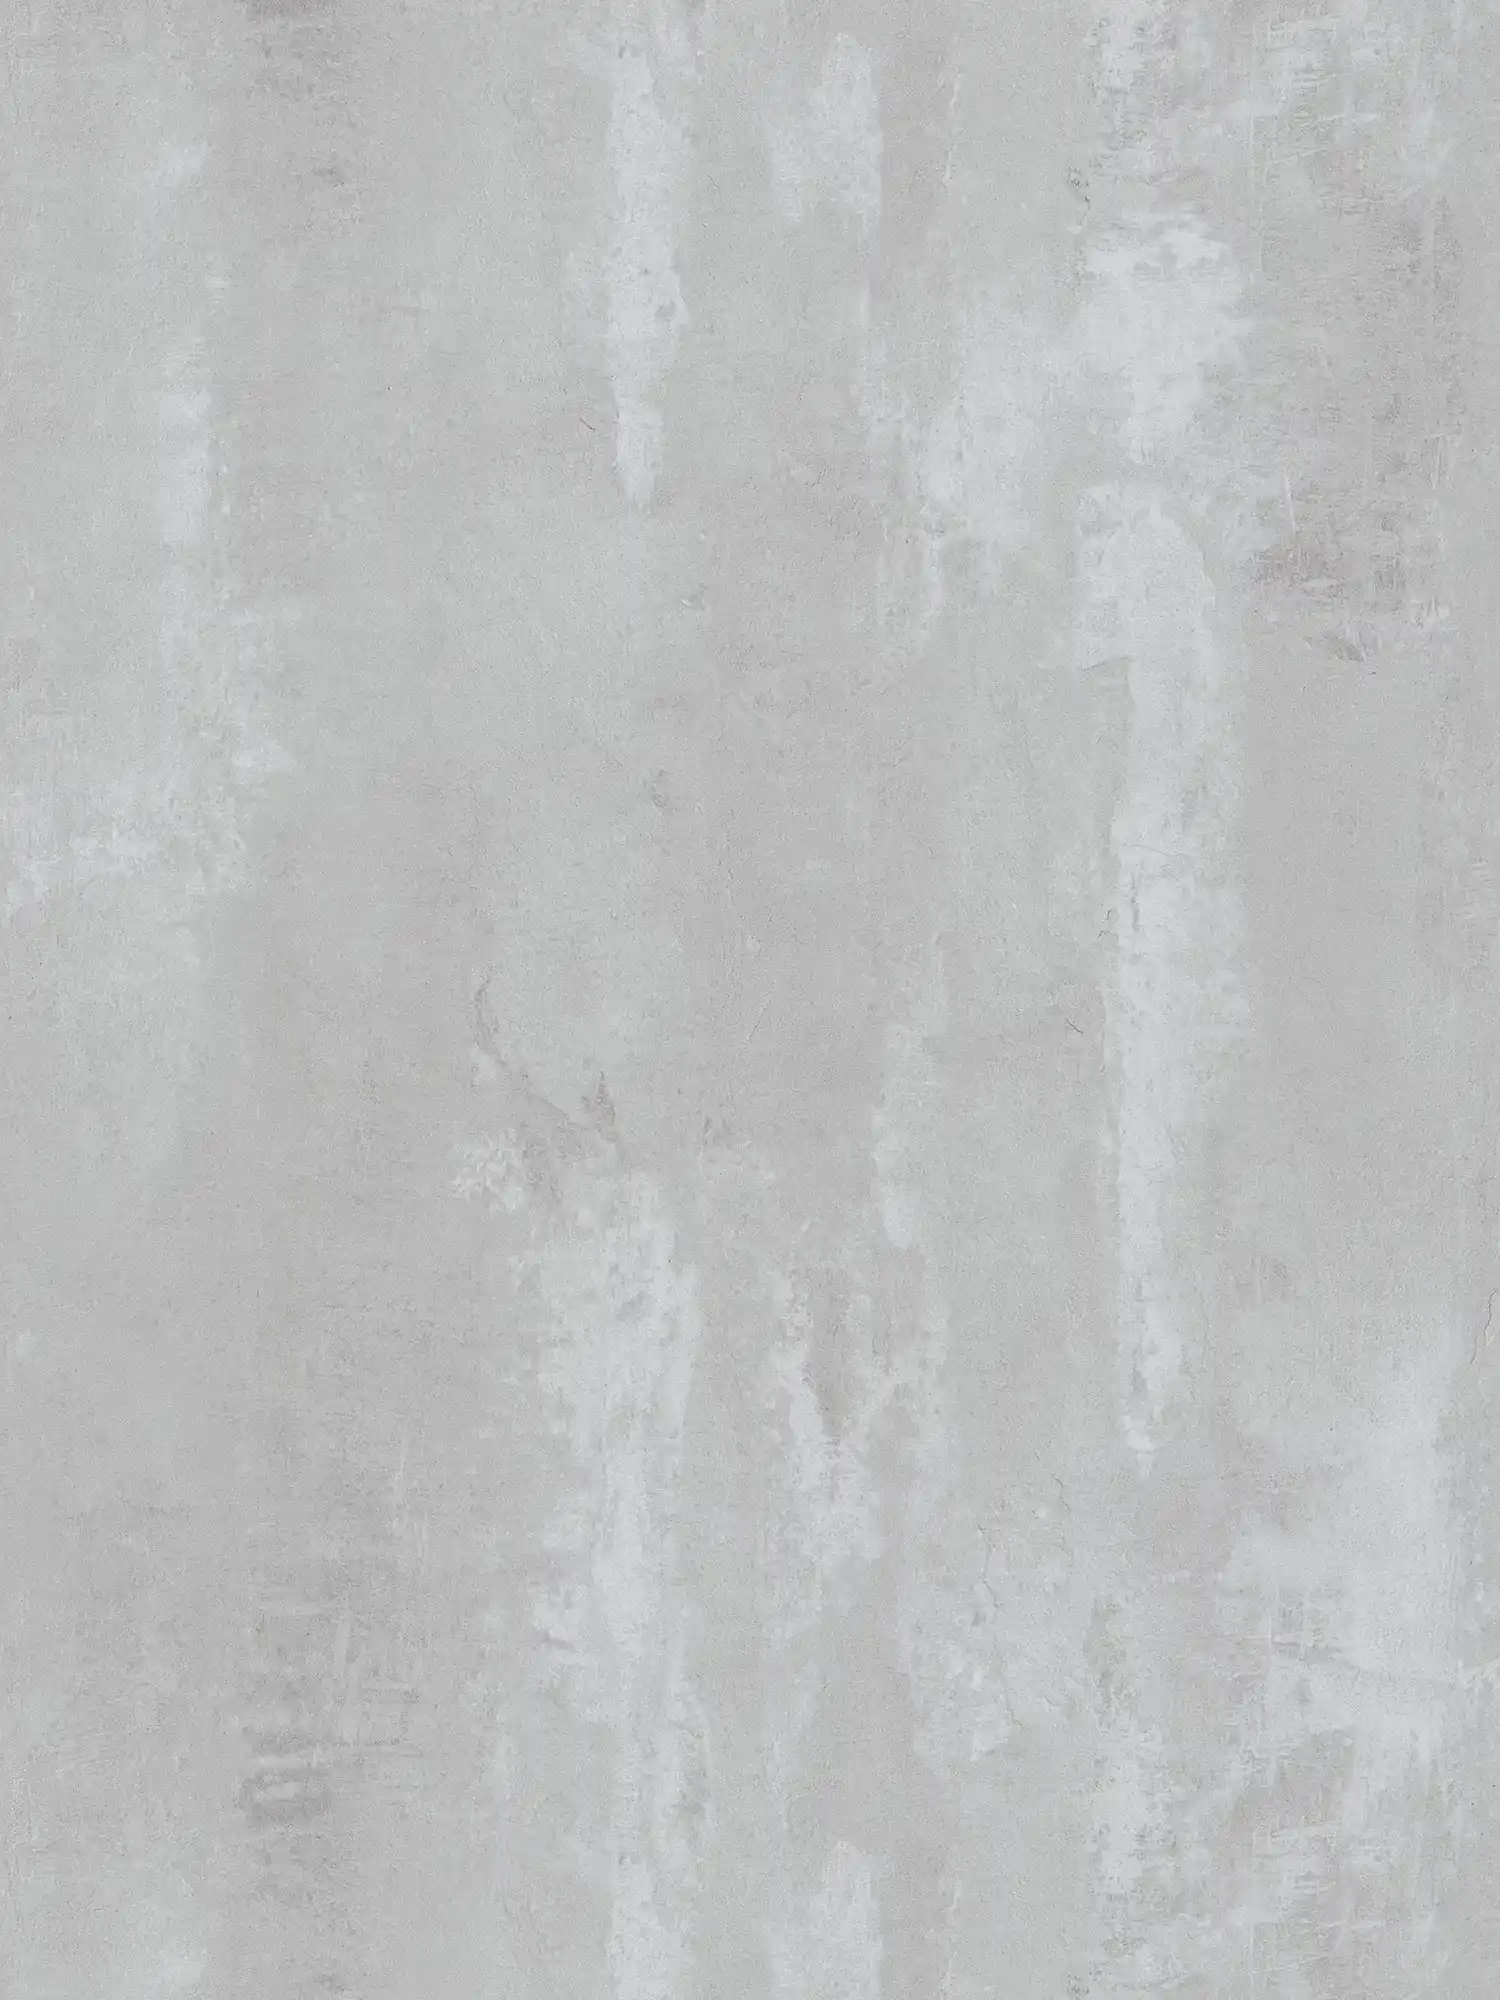         Concrete wallpaper with wiping motif in industrial style - grey
    